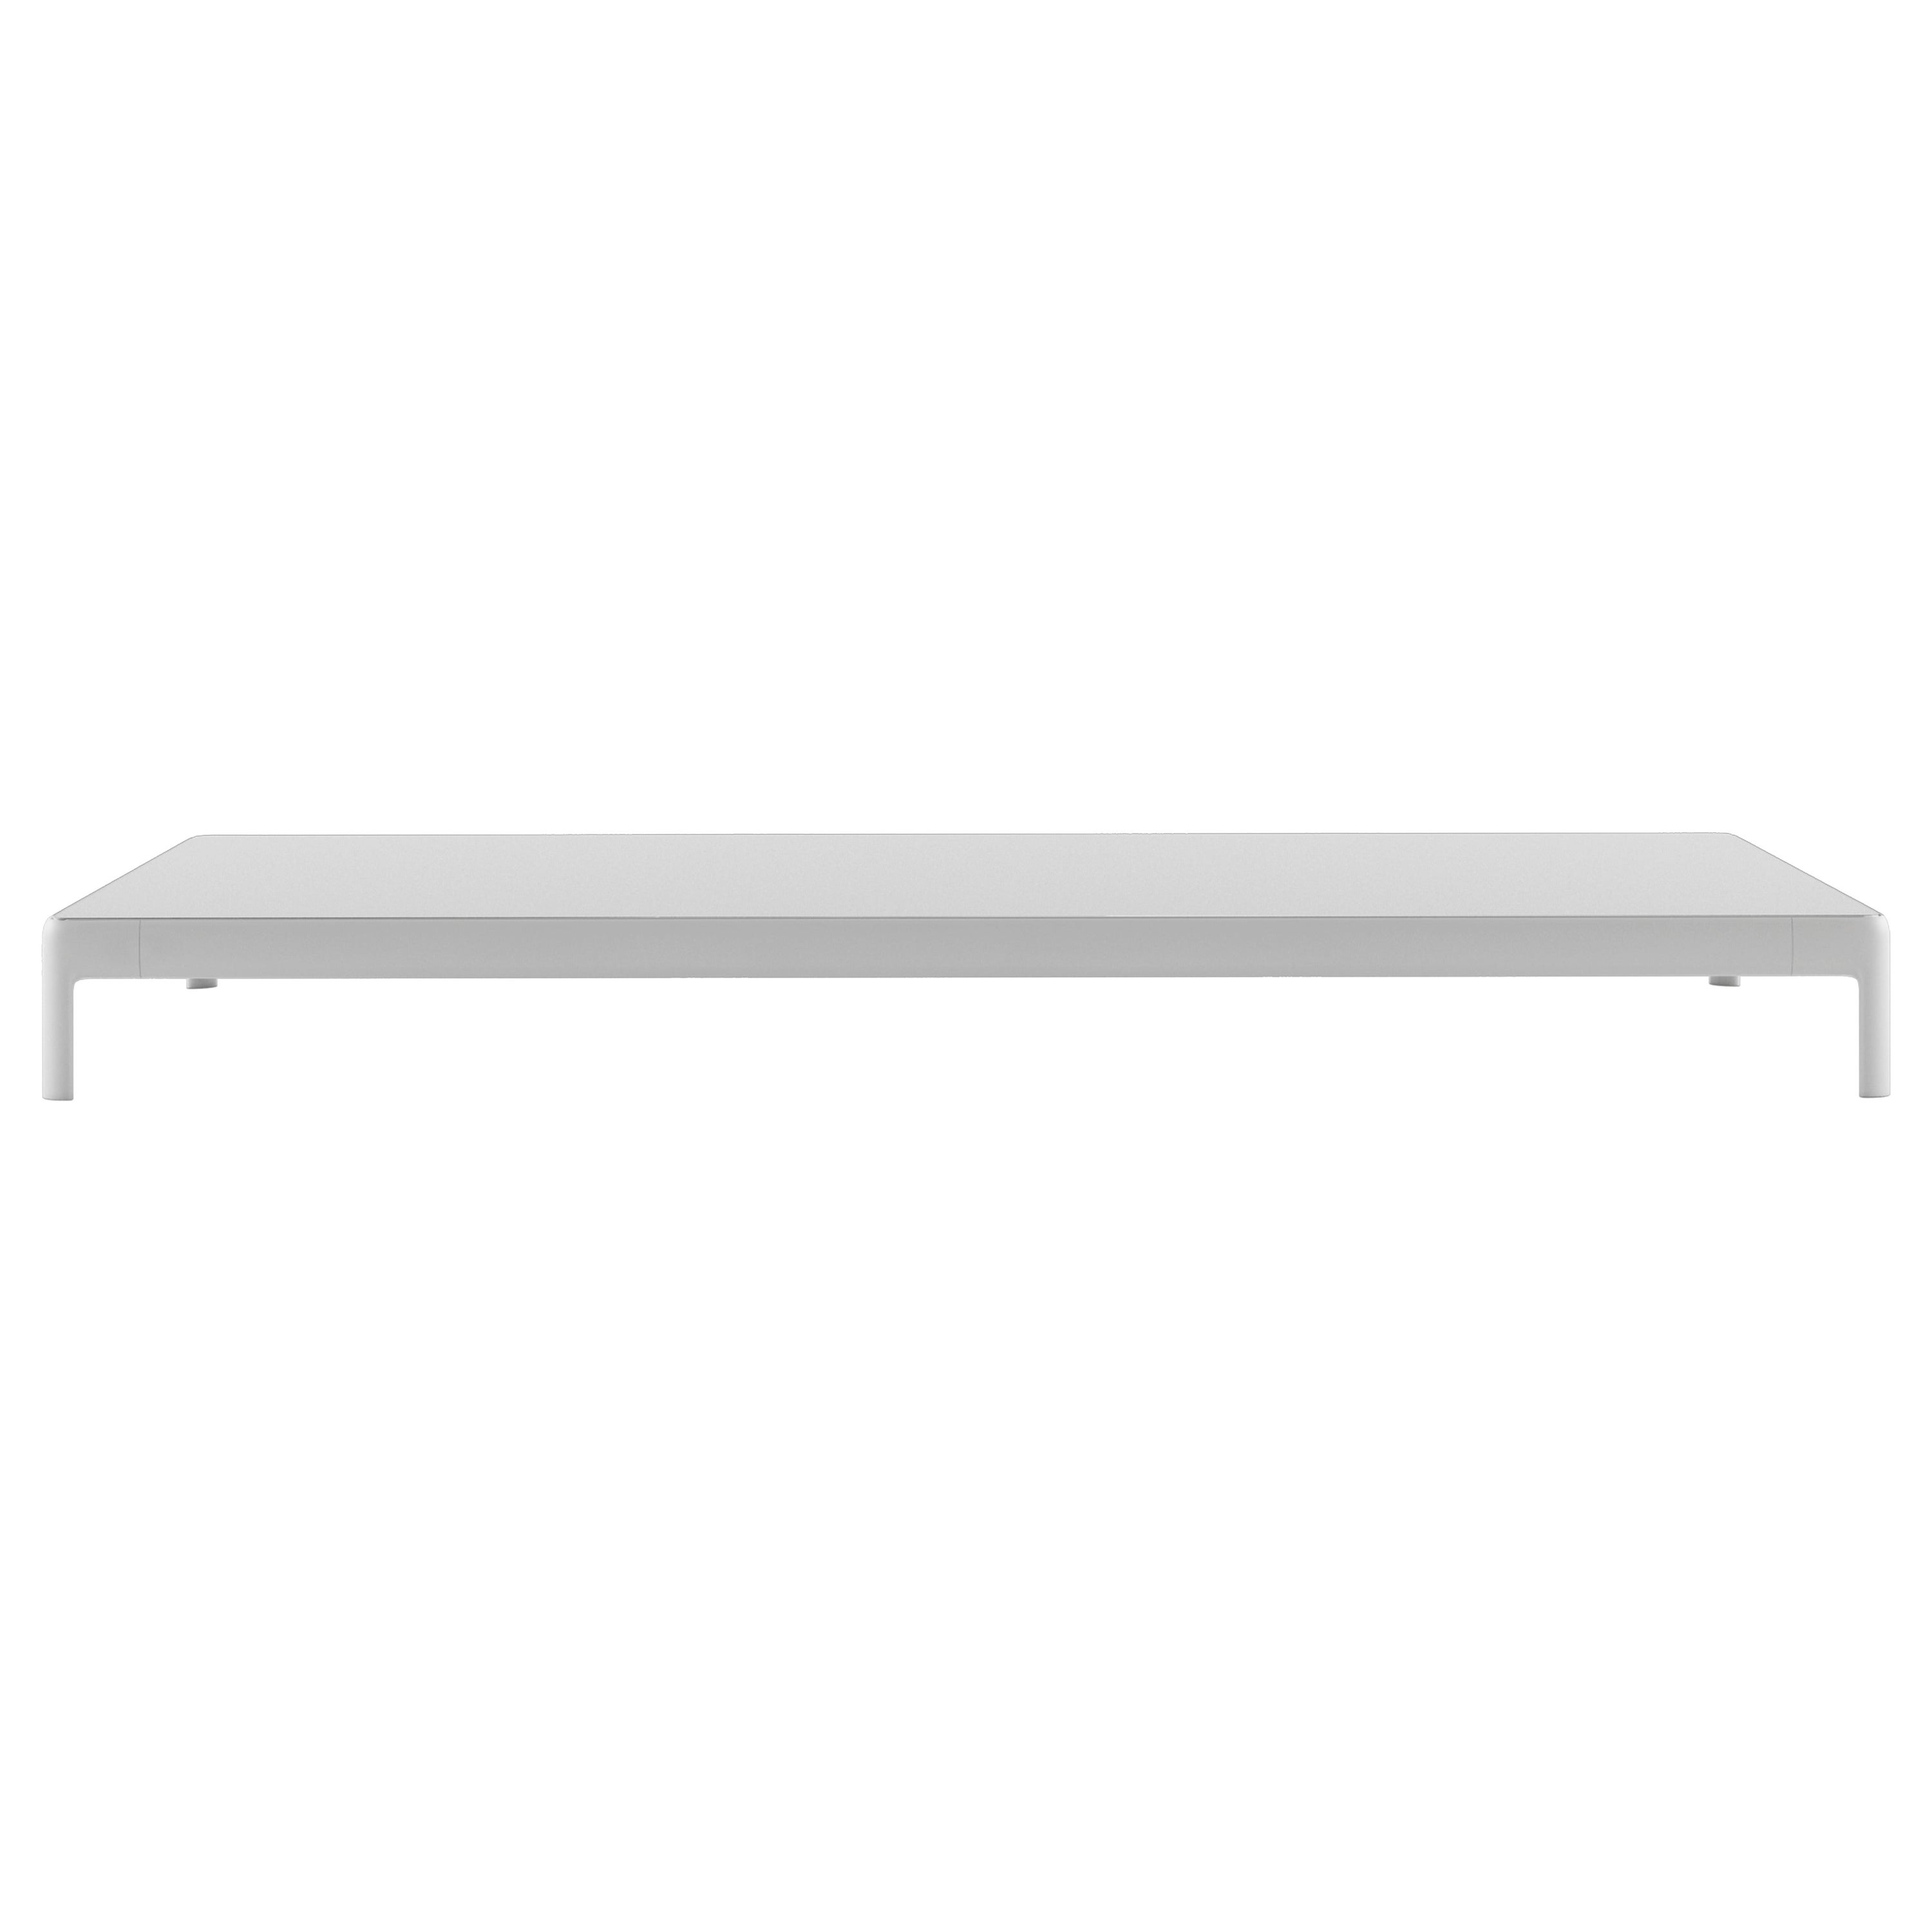 Alias P73 AluZen Soft Low Table Outdoor in White with Lacquered Aluminium Frame